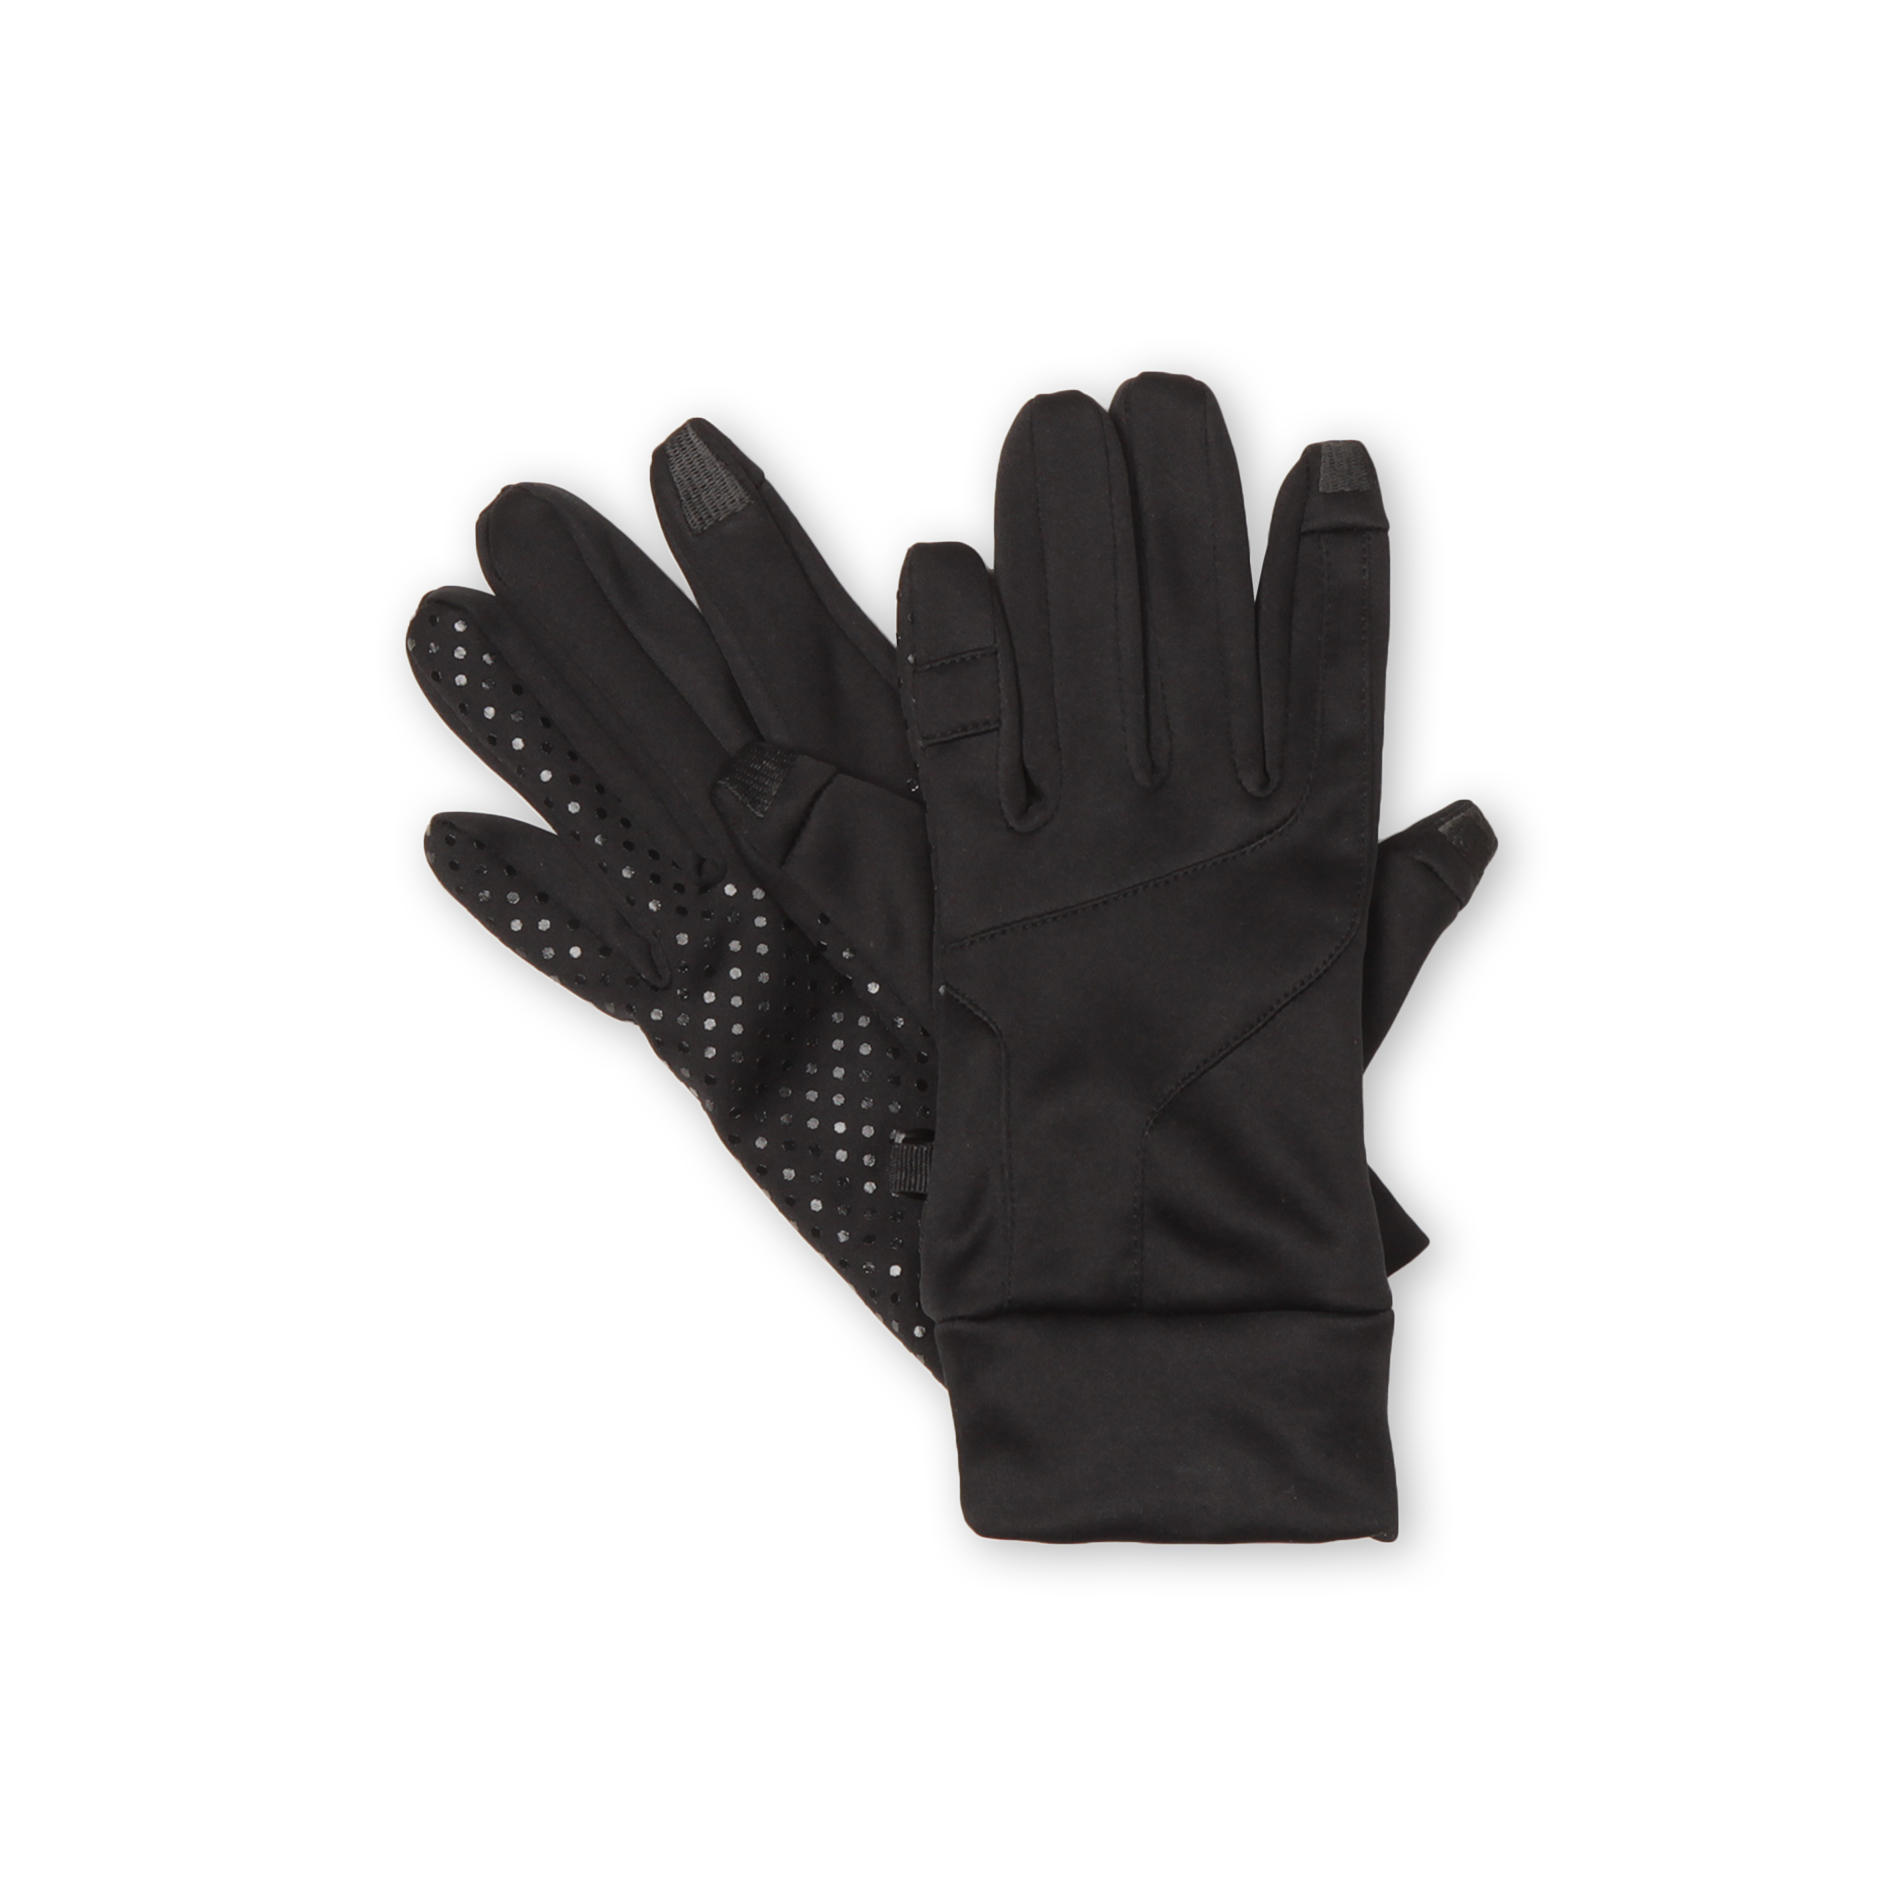 NordicTrack Women's Soft-Shell Texting Gloves